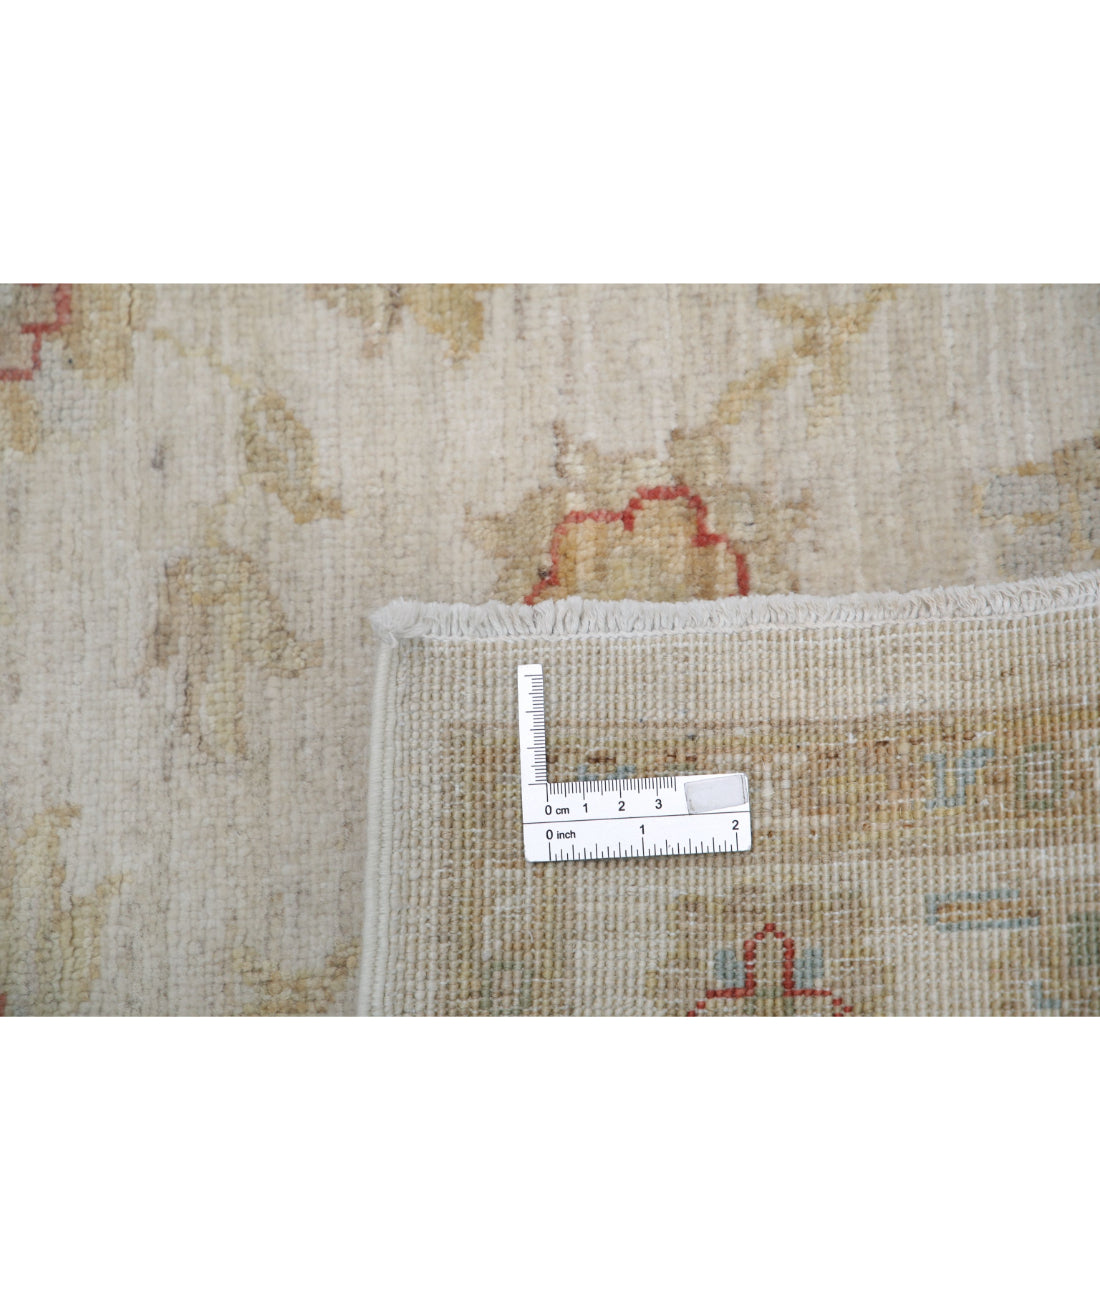 Ziegler 2'8'' X 3'11'' Hand-Knotted Wool Rug 2'8'' x 3'11'' (80 X 118) / Ivory / Ivory